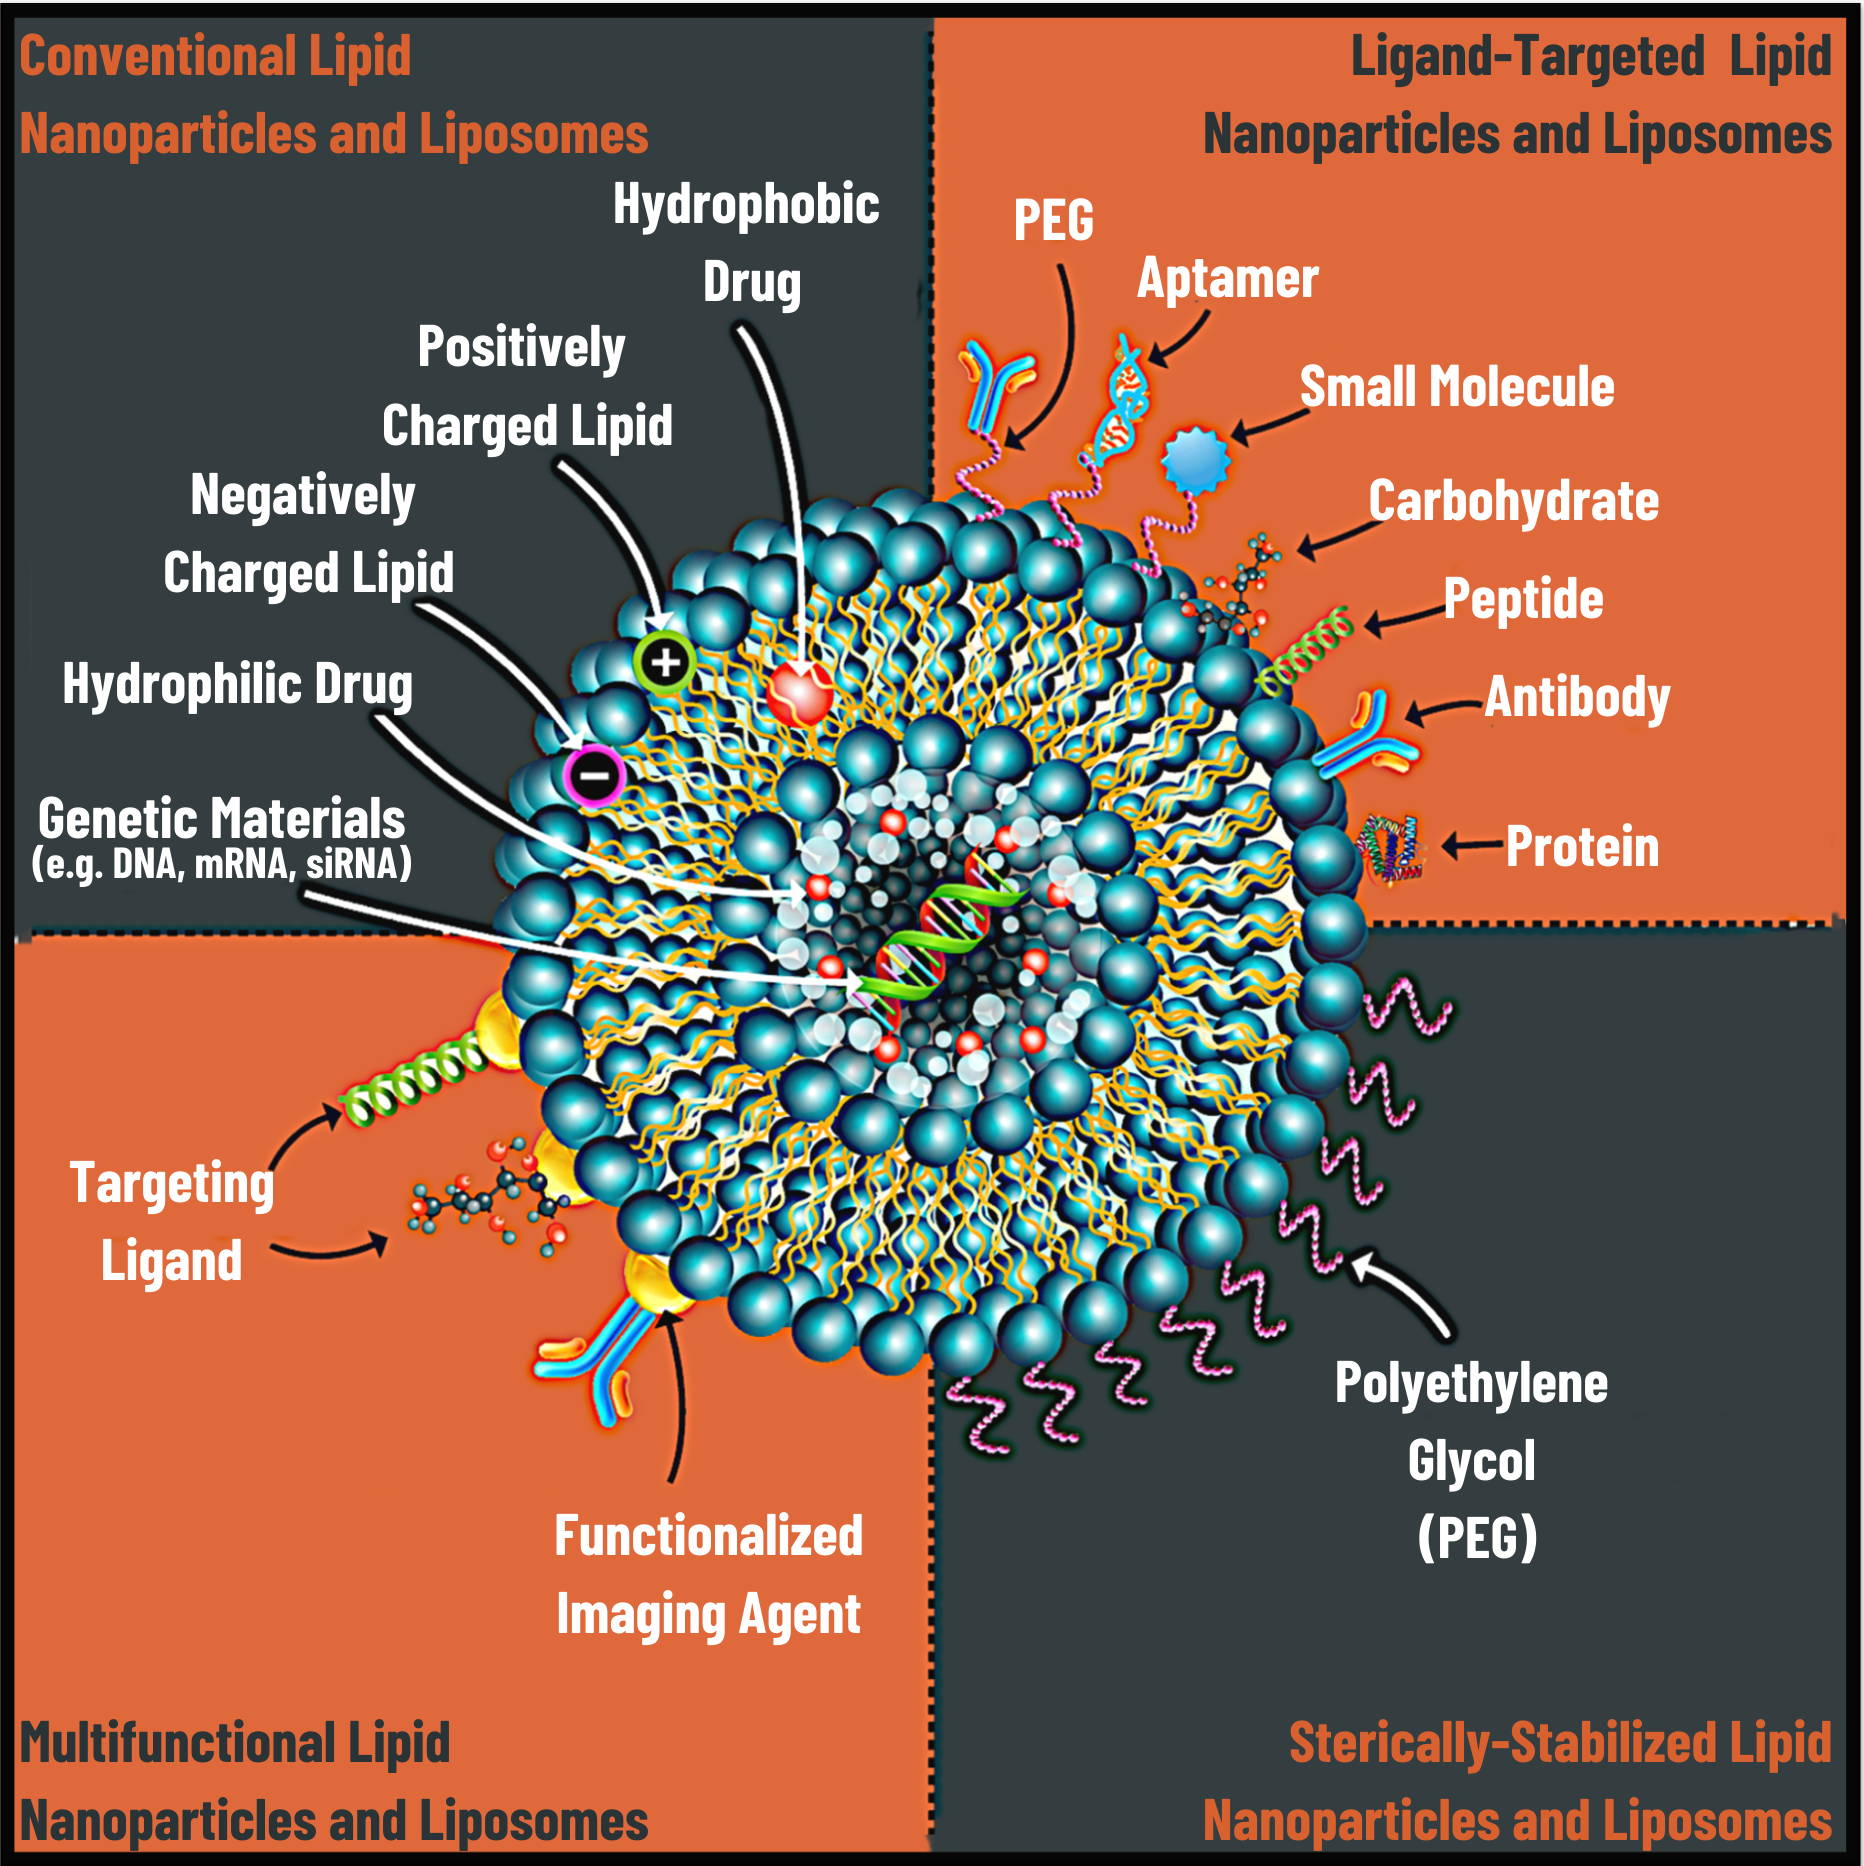 Lipid Nanoparticles and Liposomes: Clinical Breakthroughs by Lipid Nanoparticles